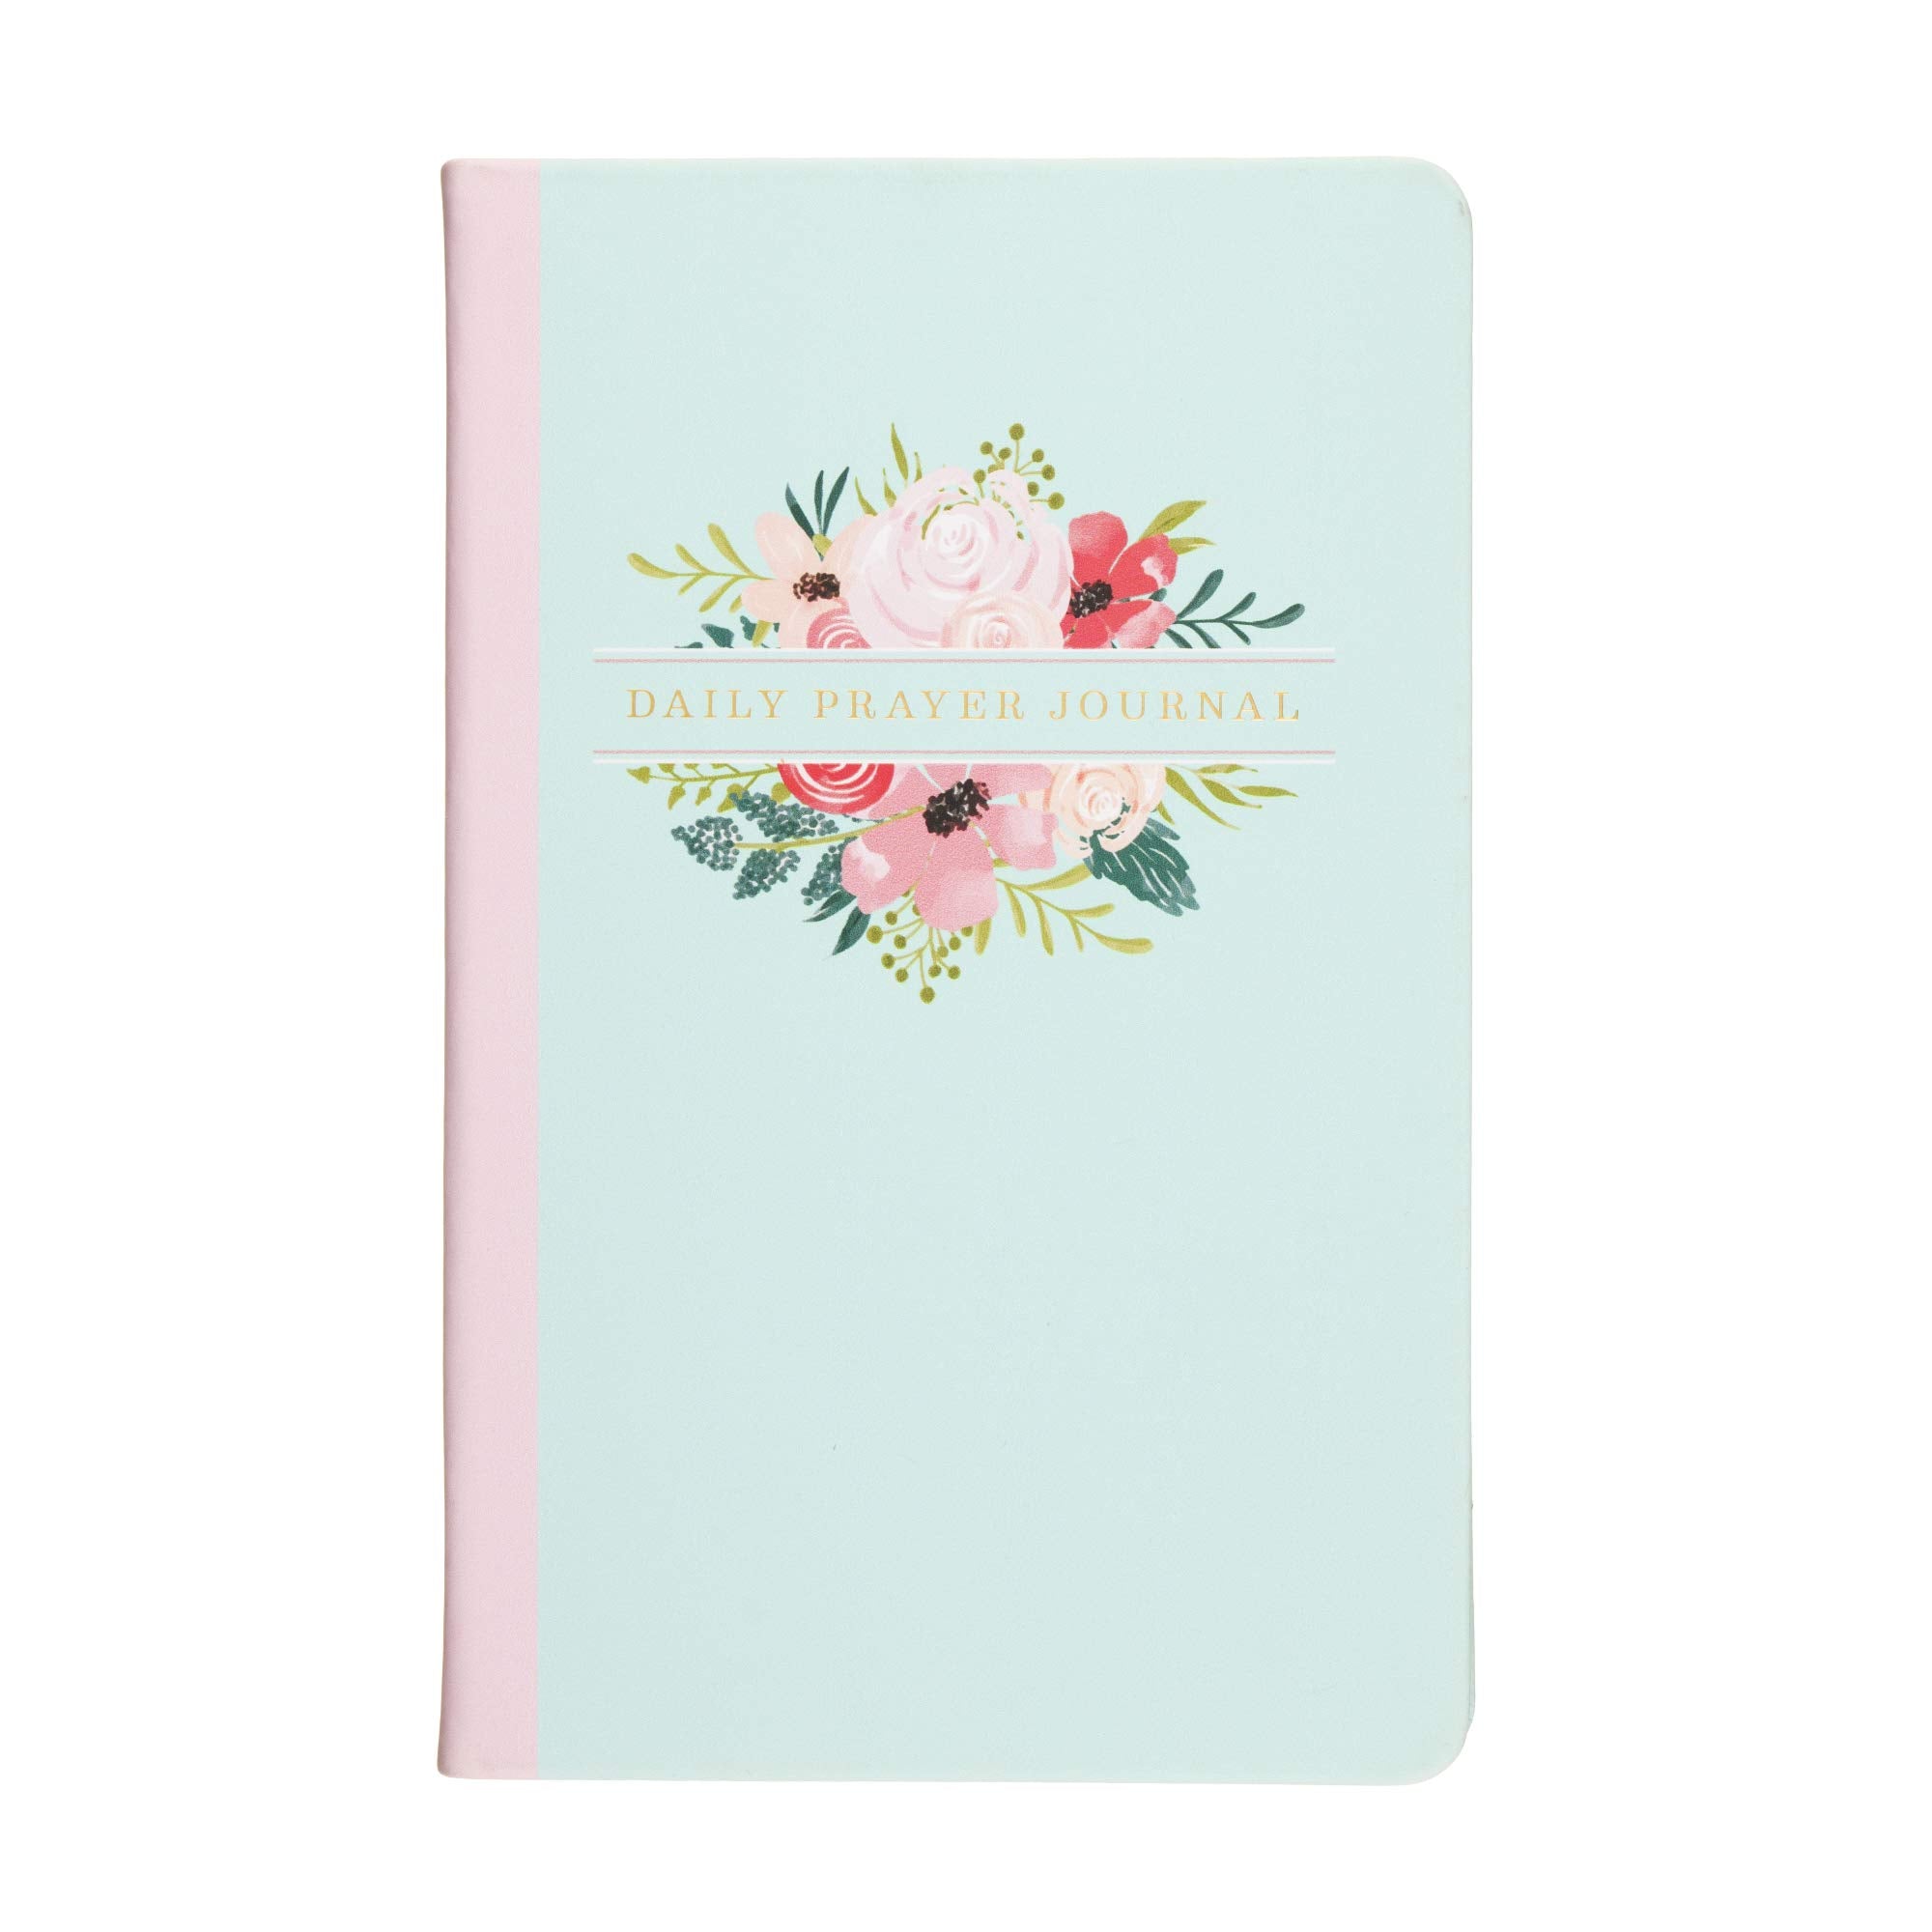 Eccolo Christian Writing Journal 200 Page Notebook with Inspirational Bible Verses